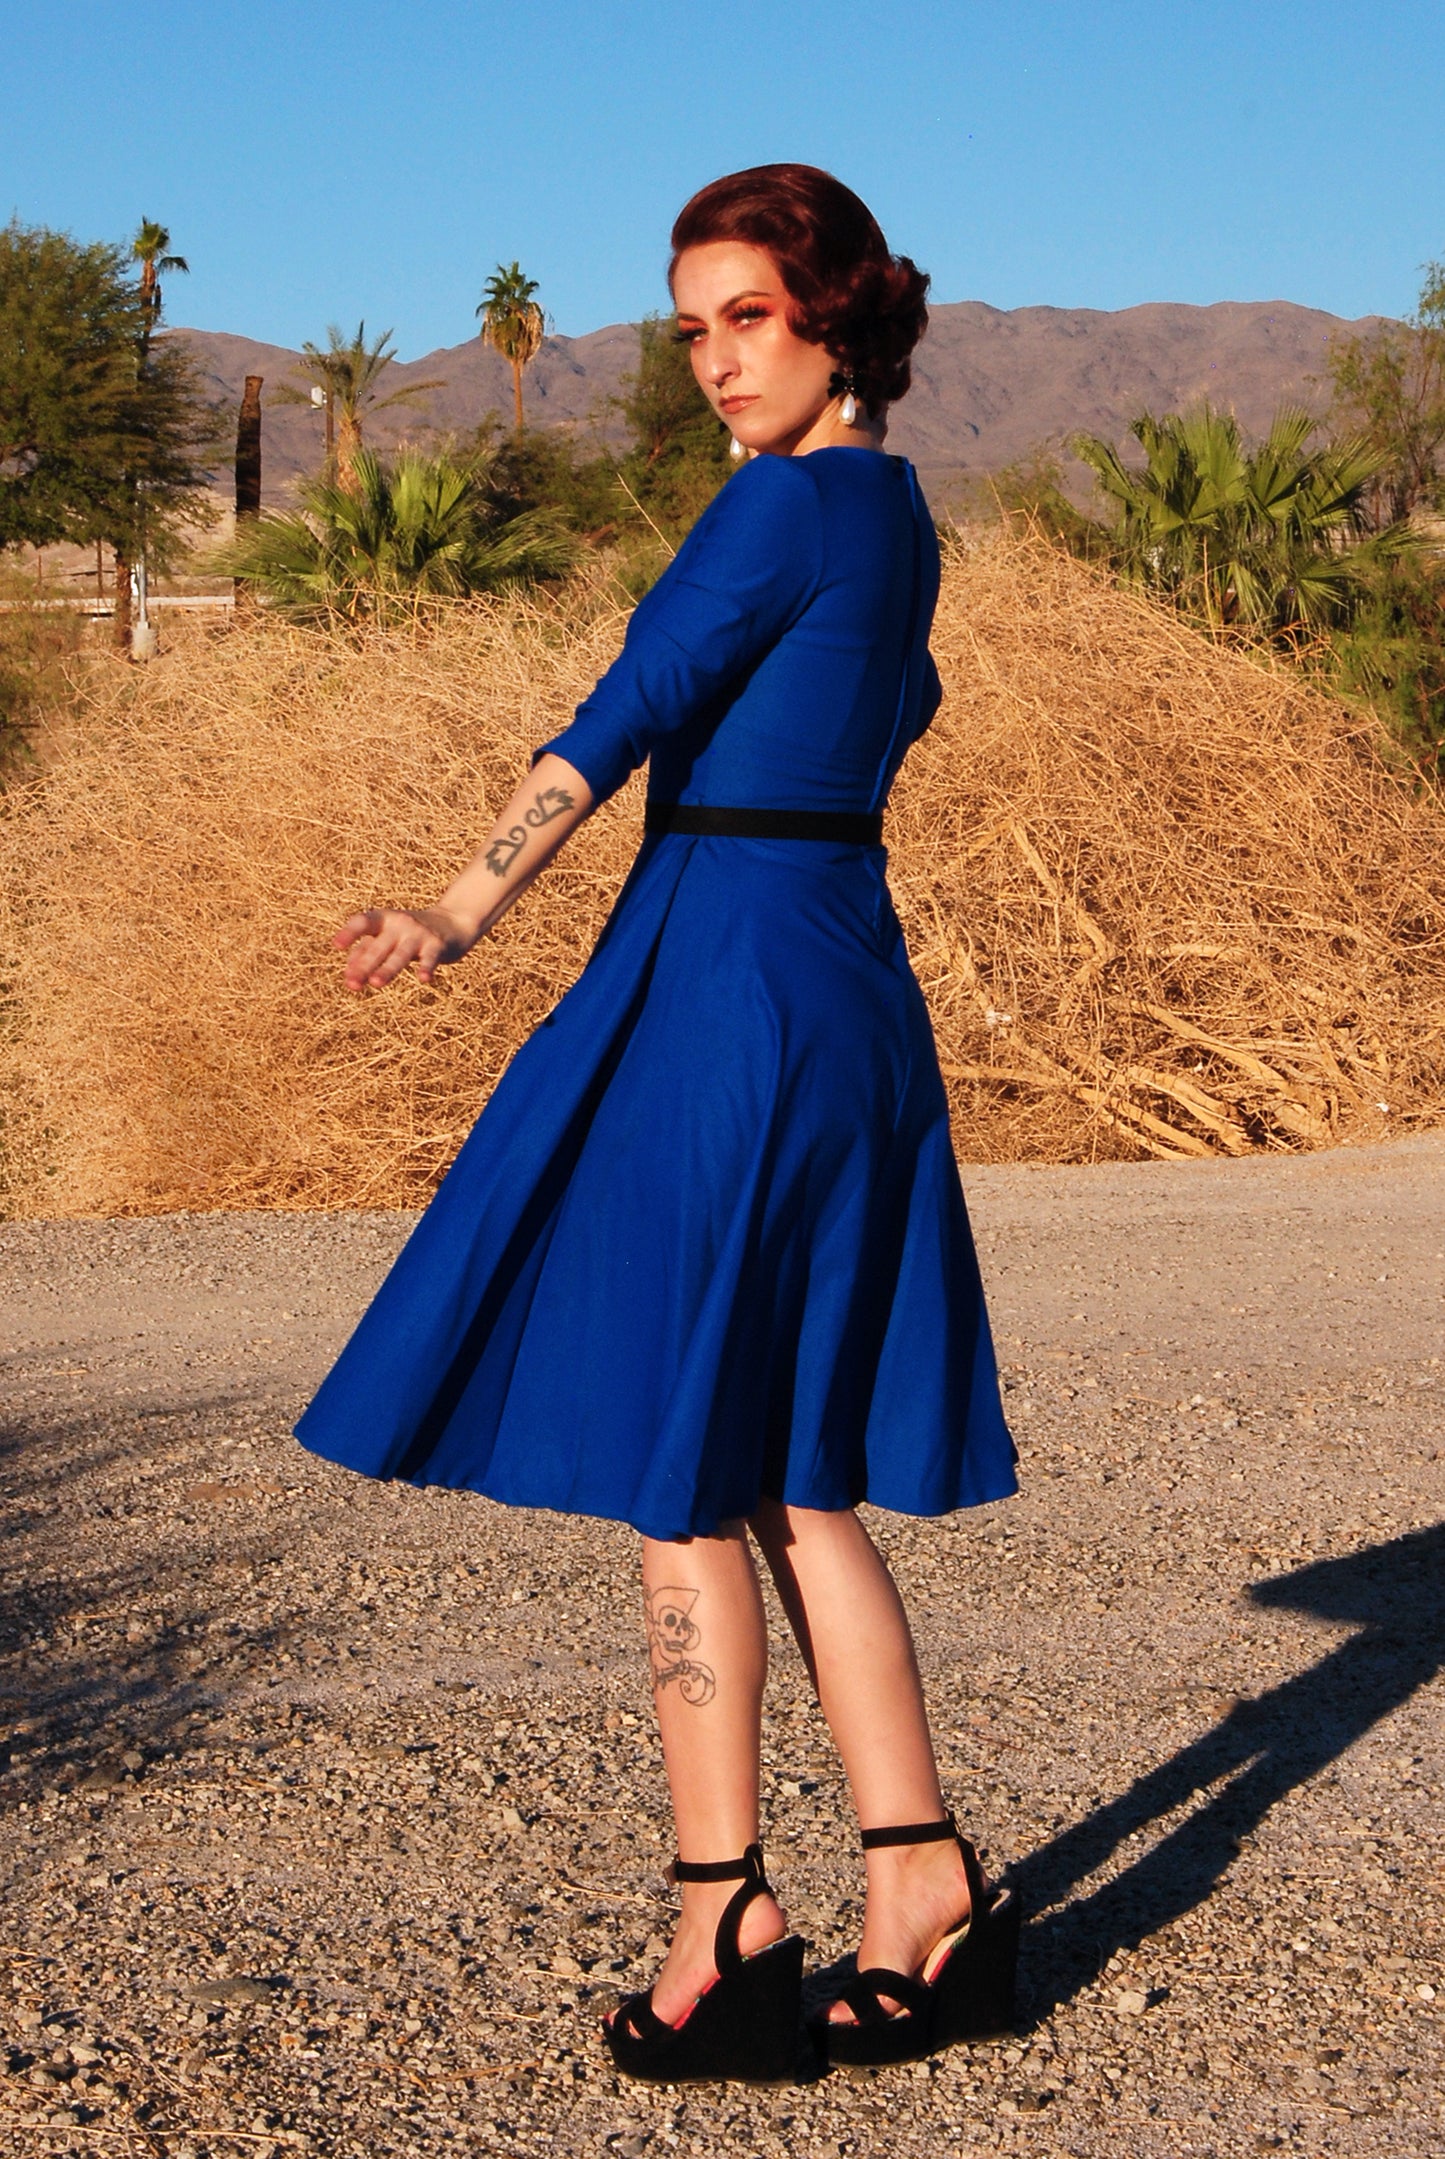 OYS - XS - S - 4X - Erin Vintage Style Swing Dress in Bright Blue Bengaline | Pinup Couture